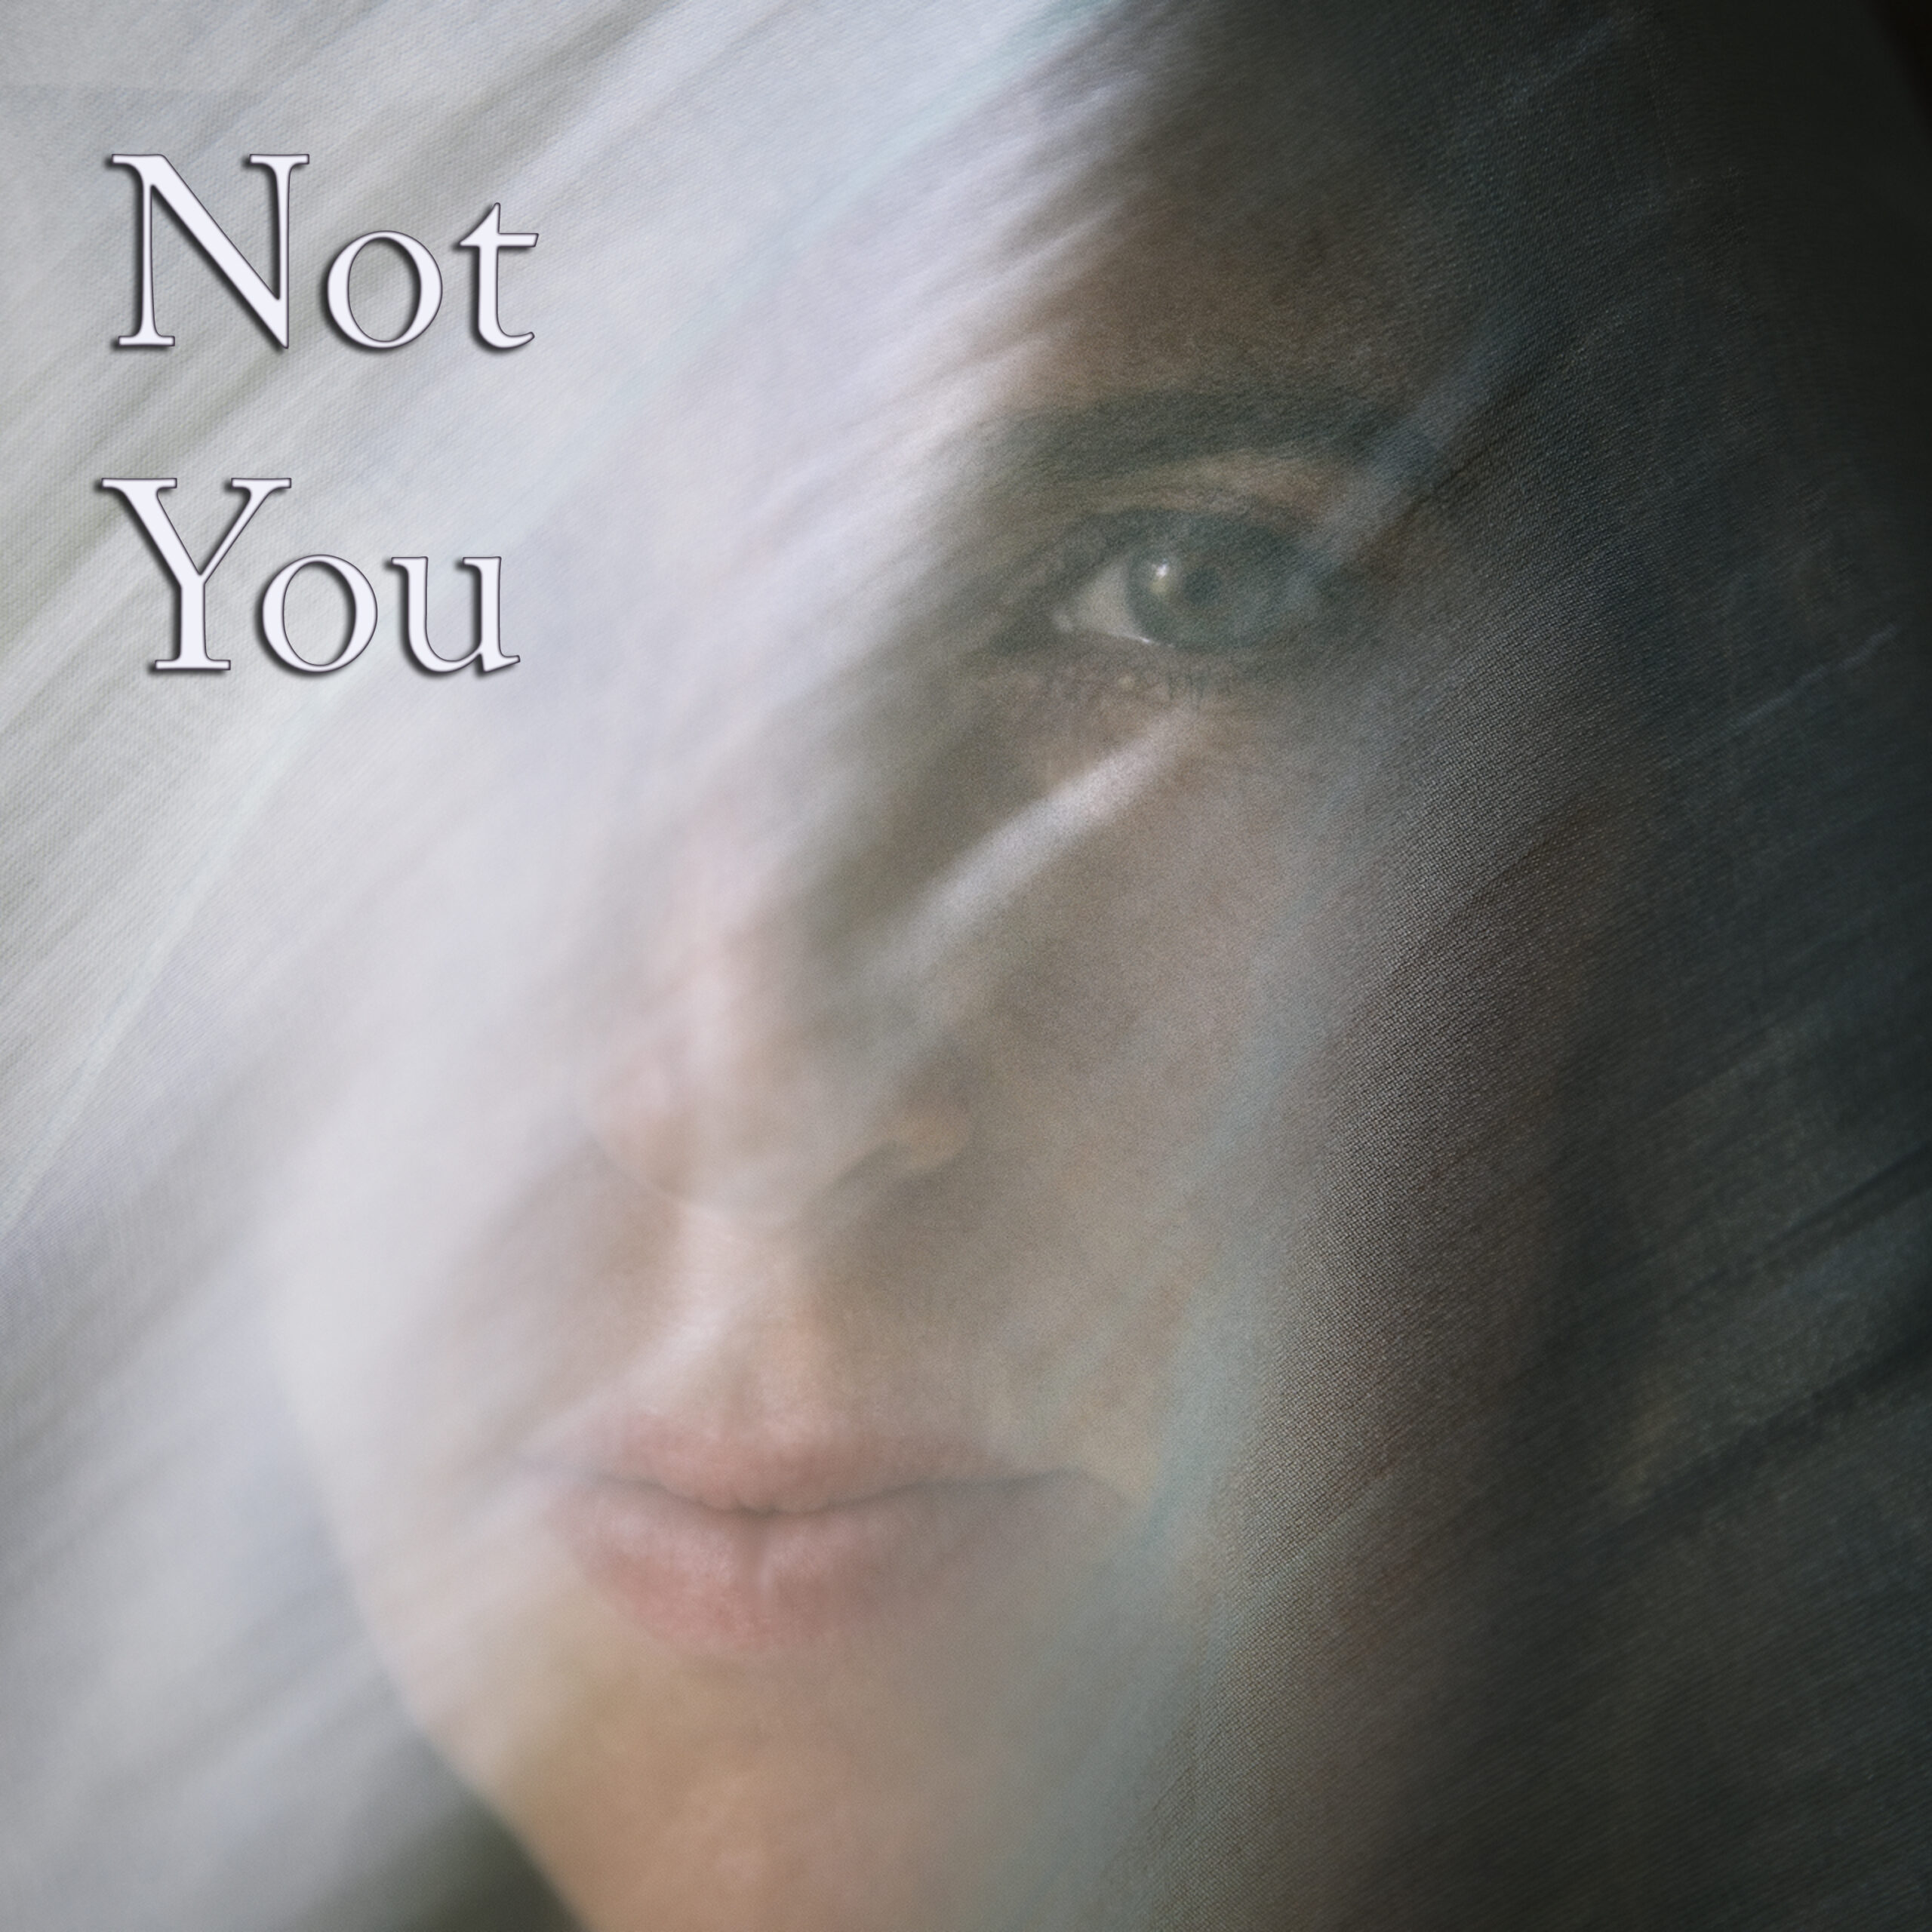 Marsha Swanson To Return With New Single, ‘Not You’